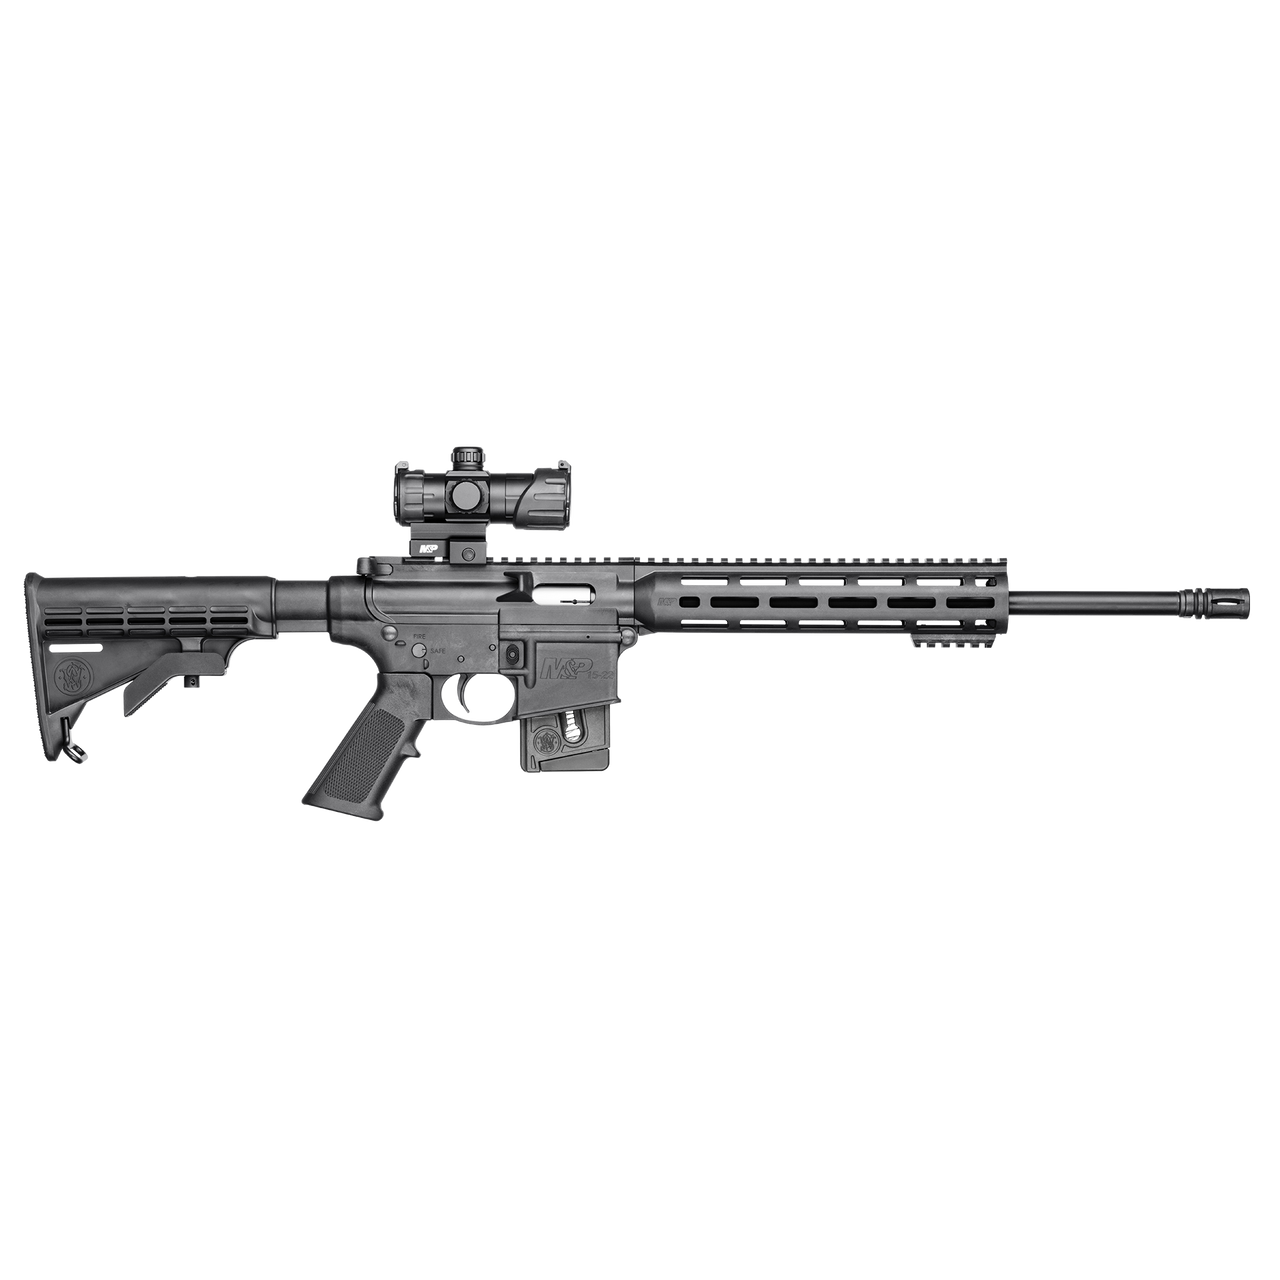 Buy Smith & Wesson M&P 15-22 Sport Or W M&P Red Green Dot Optic 10 Rounds Long Gun Online